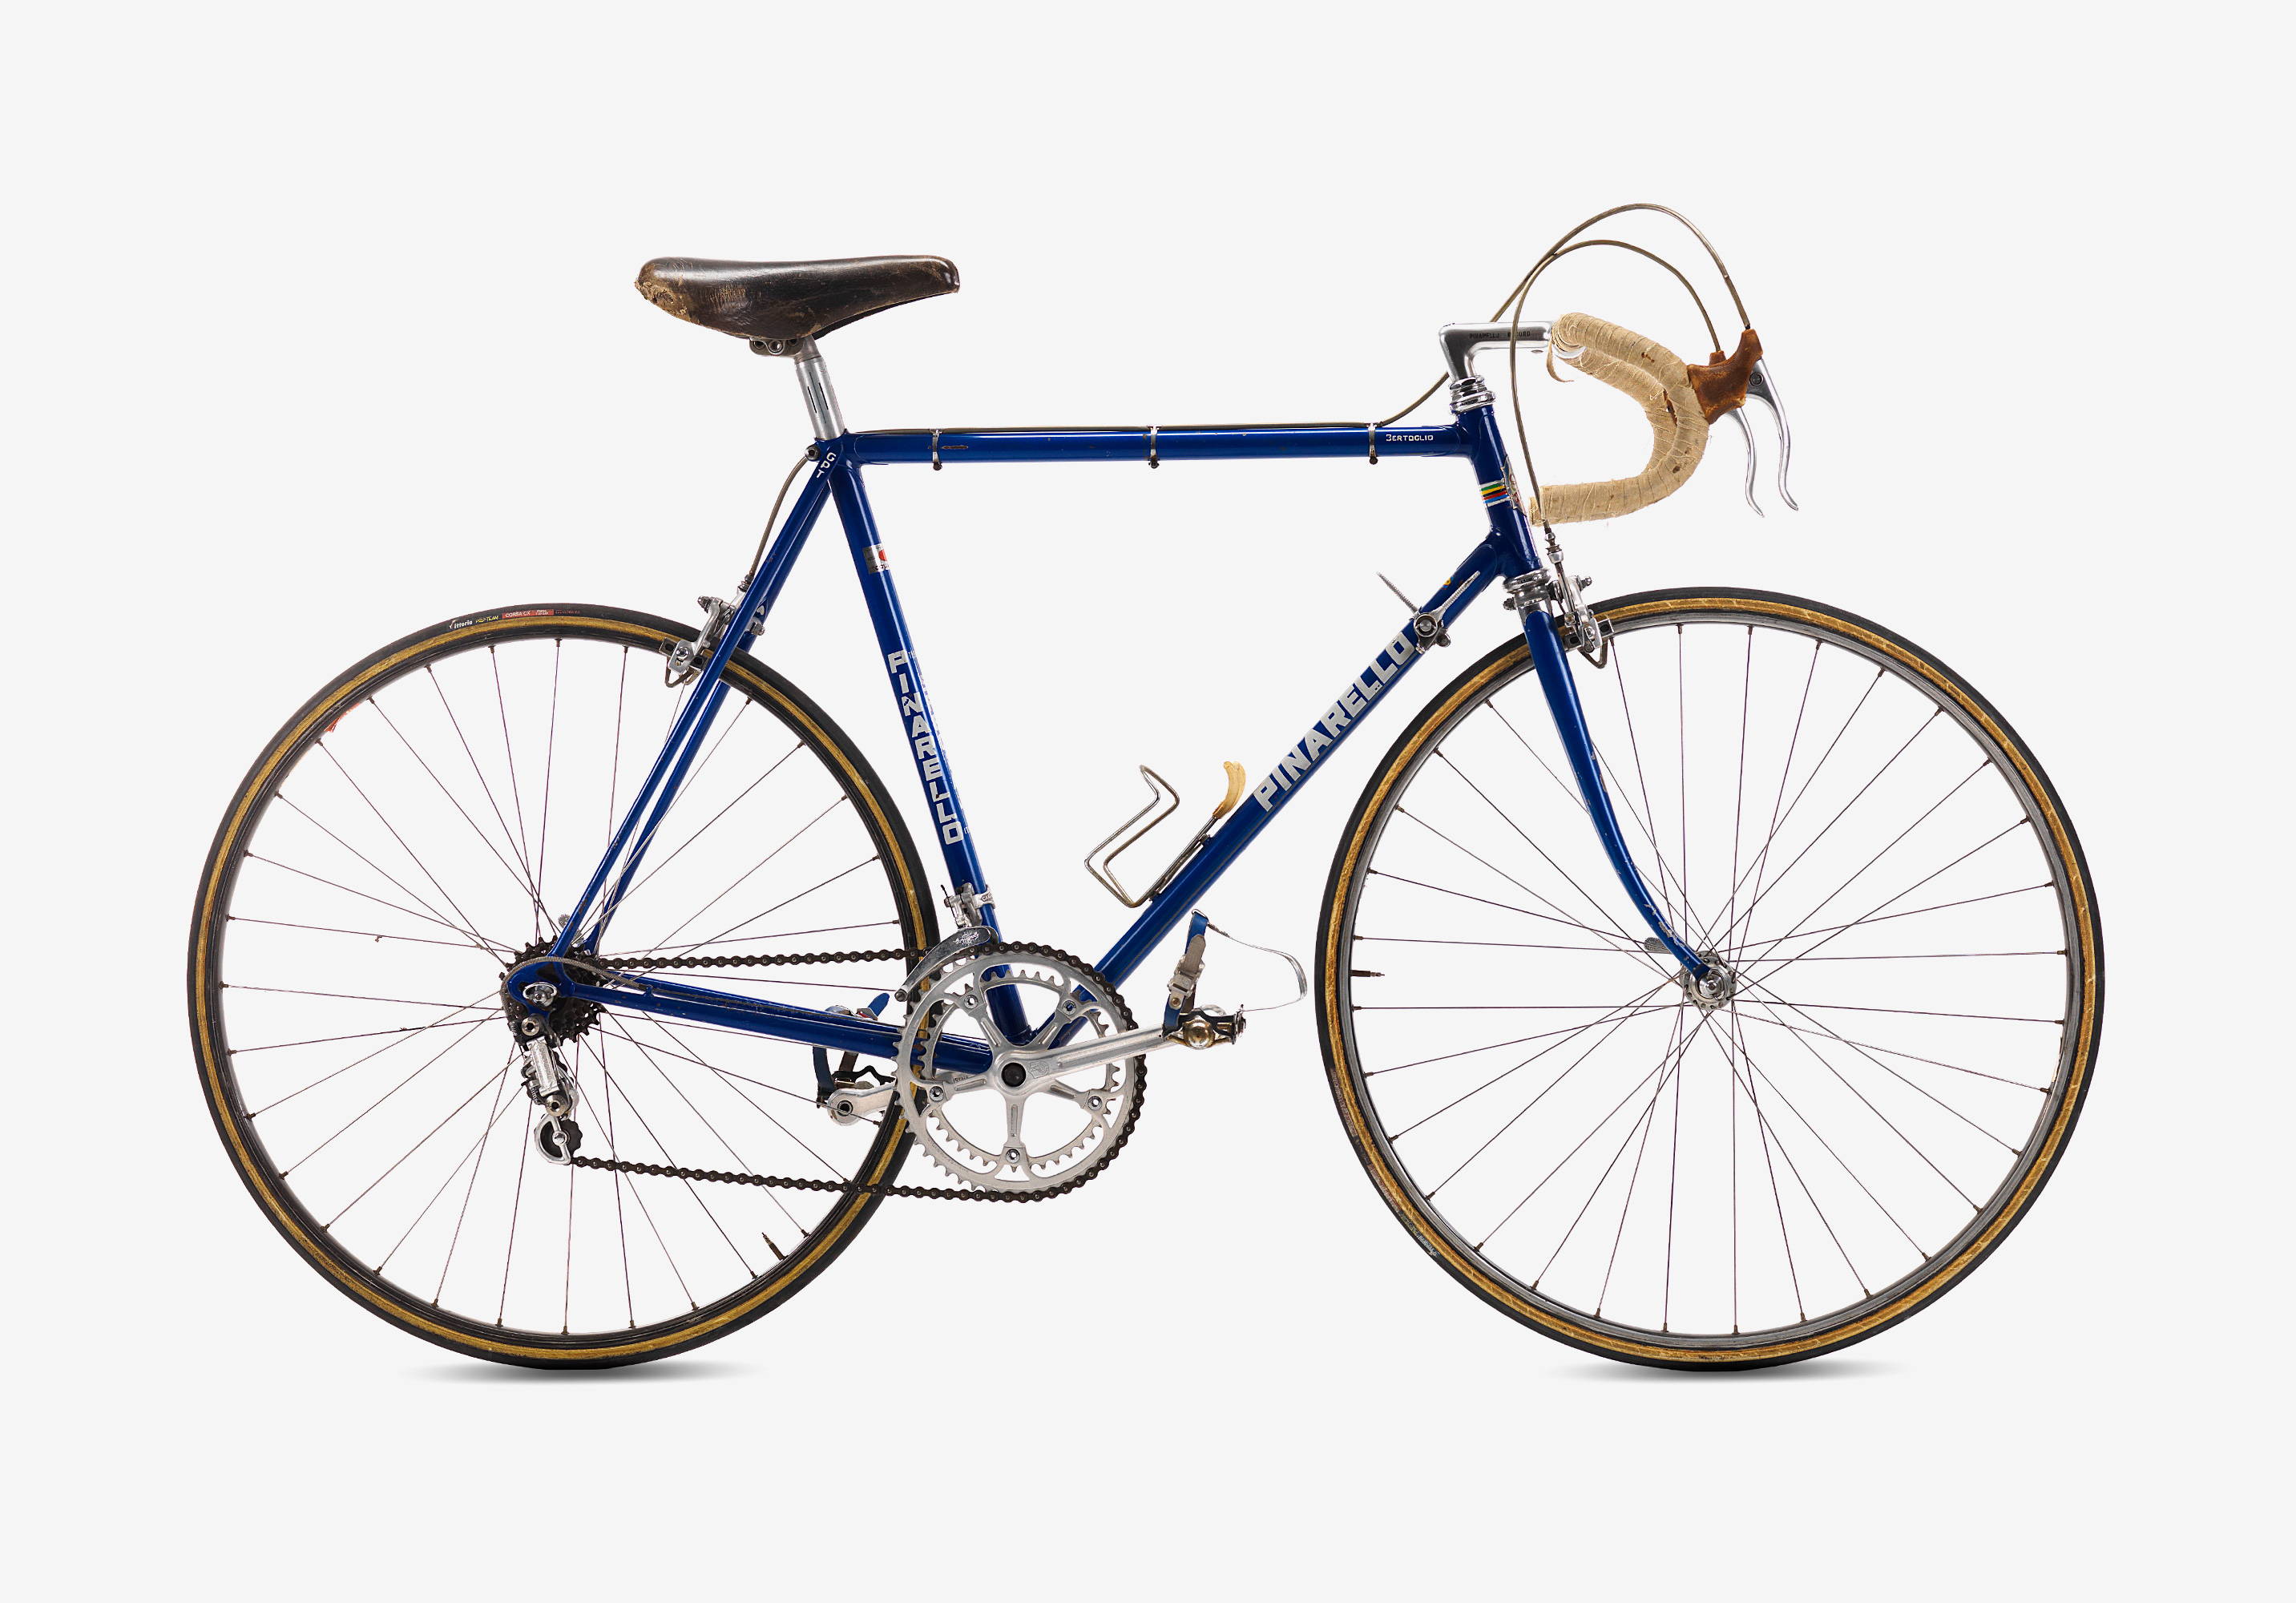 Photograph of a blue vintage Pinarello road bike with classic Campagnolo Super Record groupset